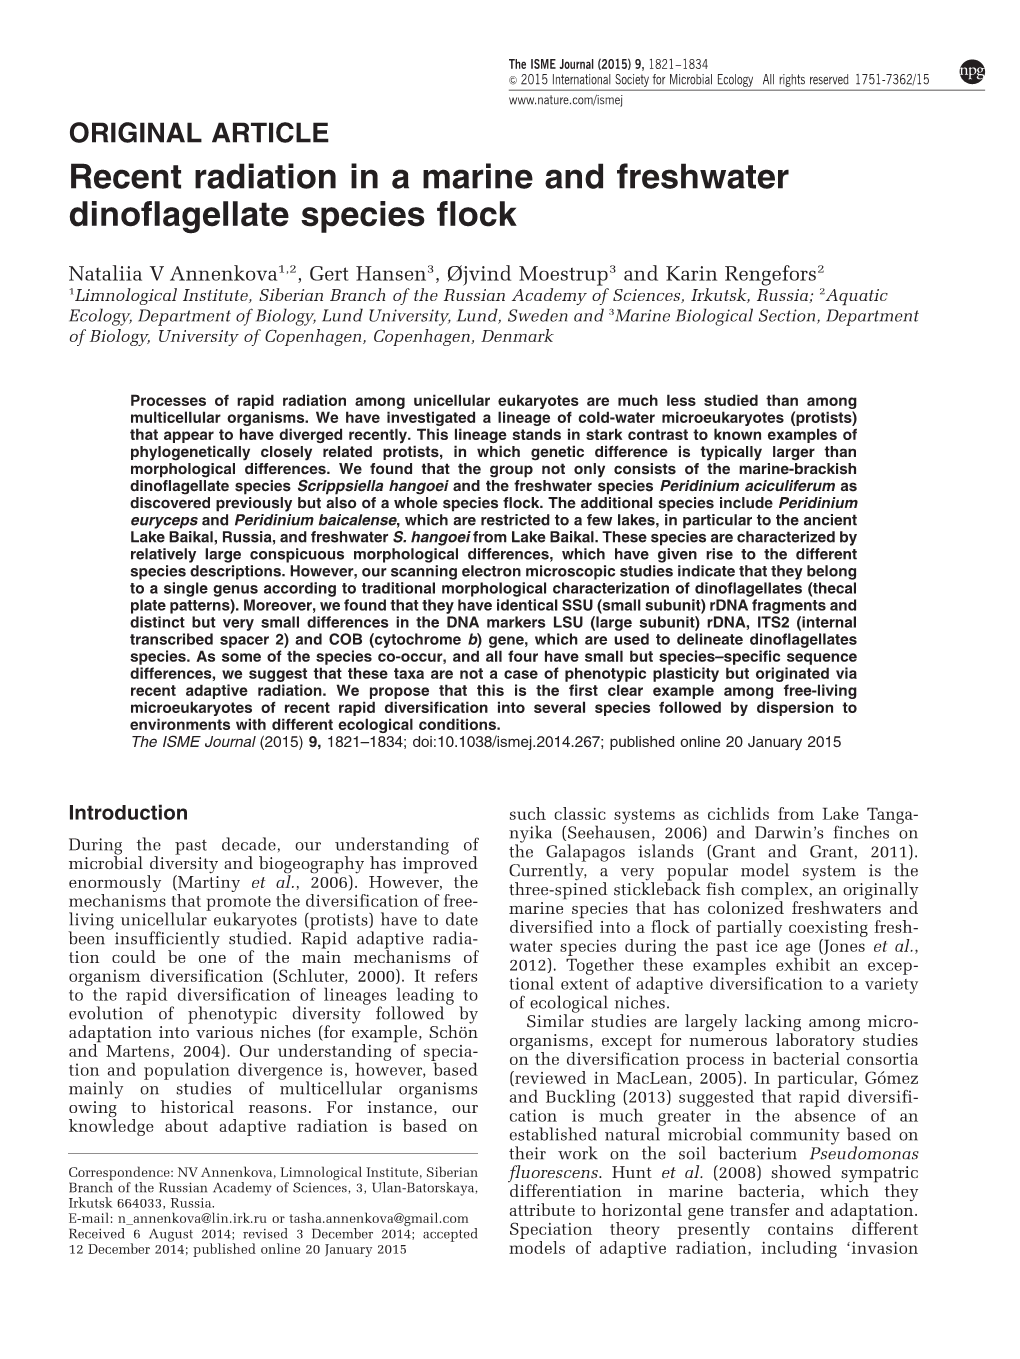 Recent Radiation in a Marine and Freshwater Dinoflagellate Species Flock